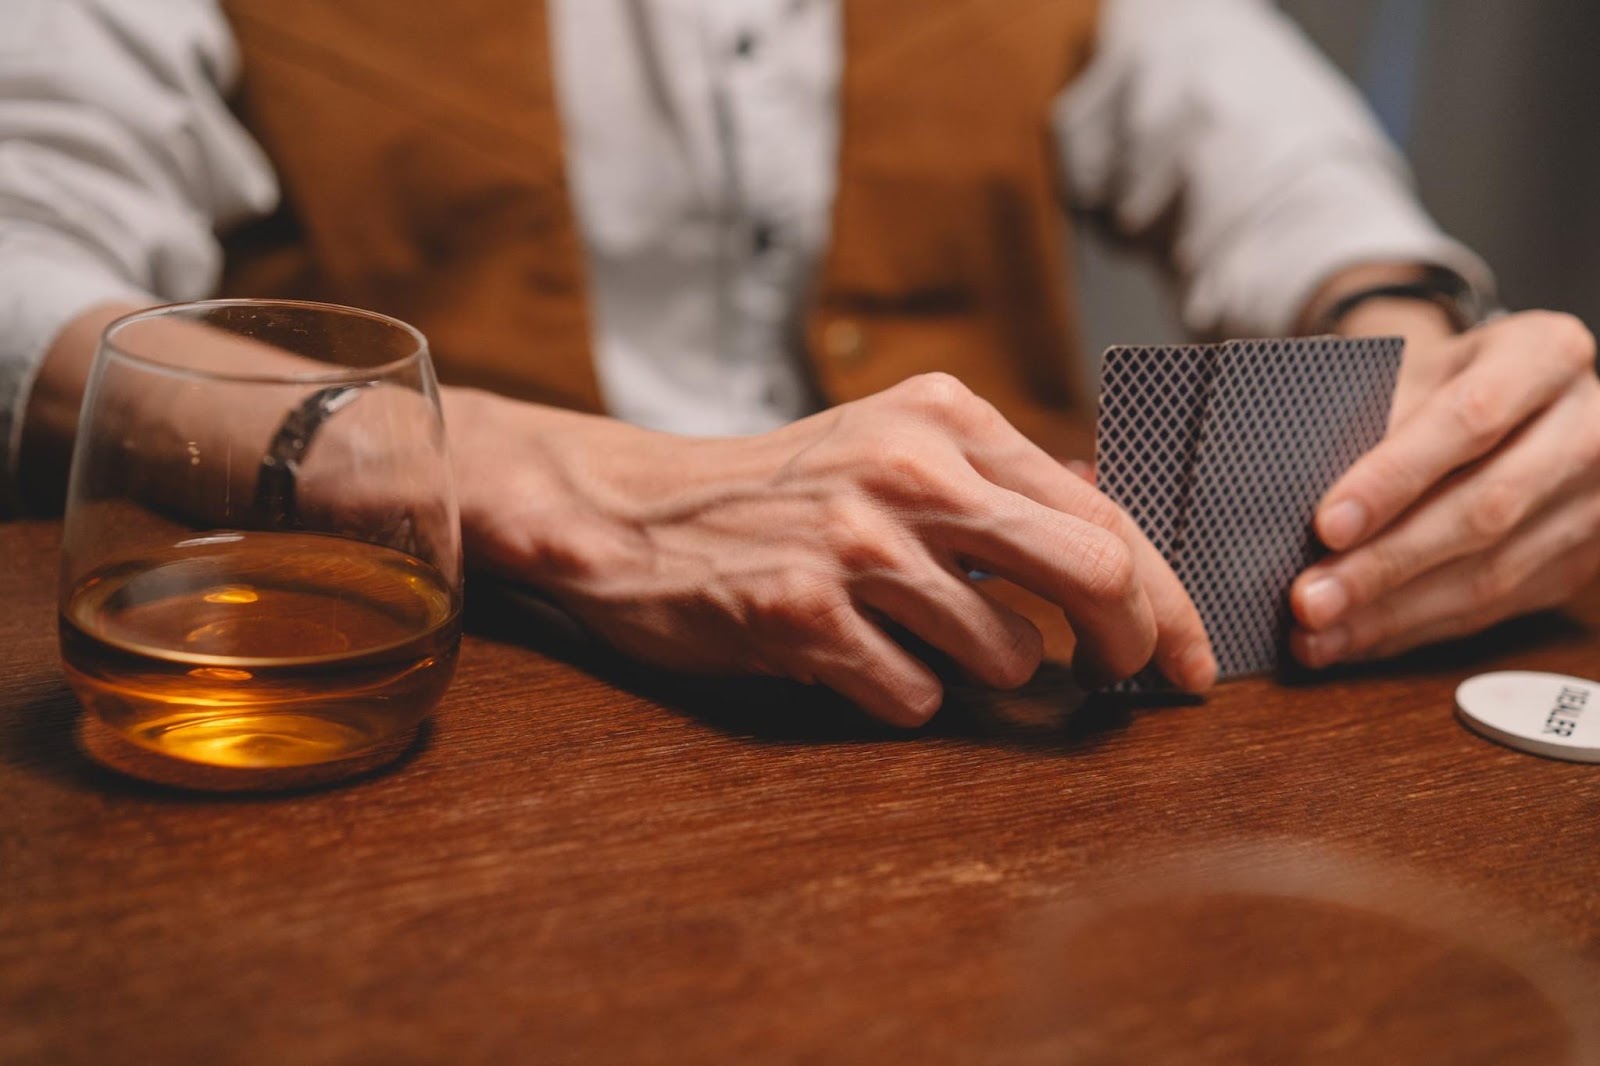 A man playing poker with a glass of whisky to his right.